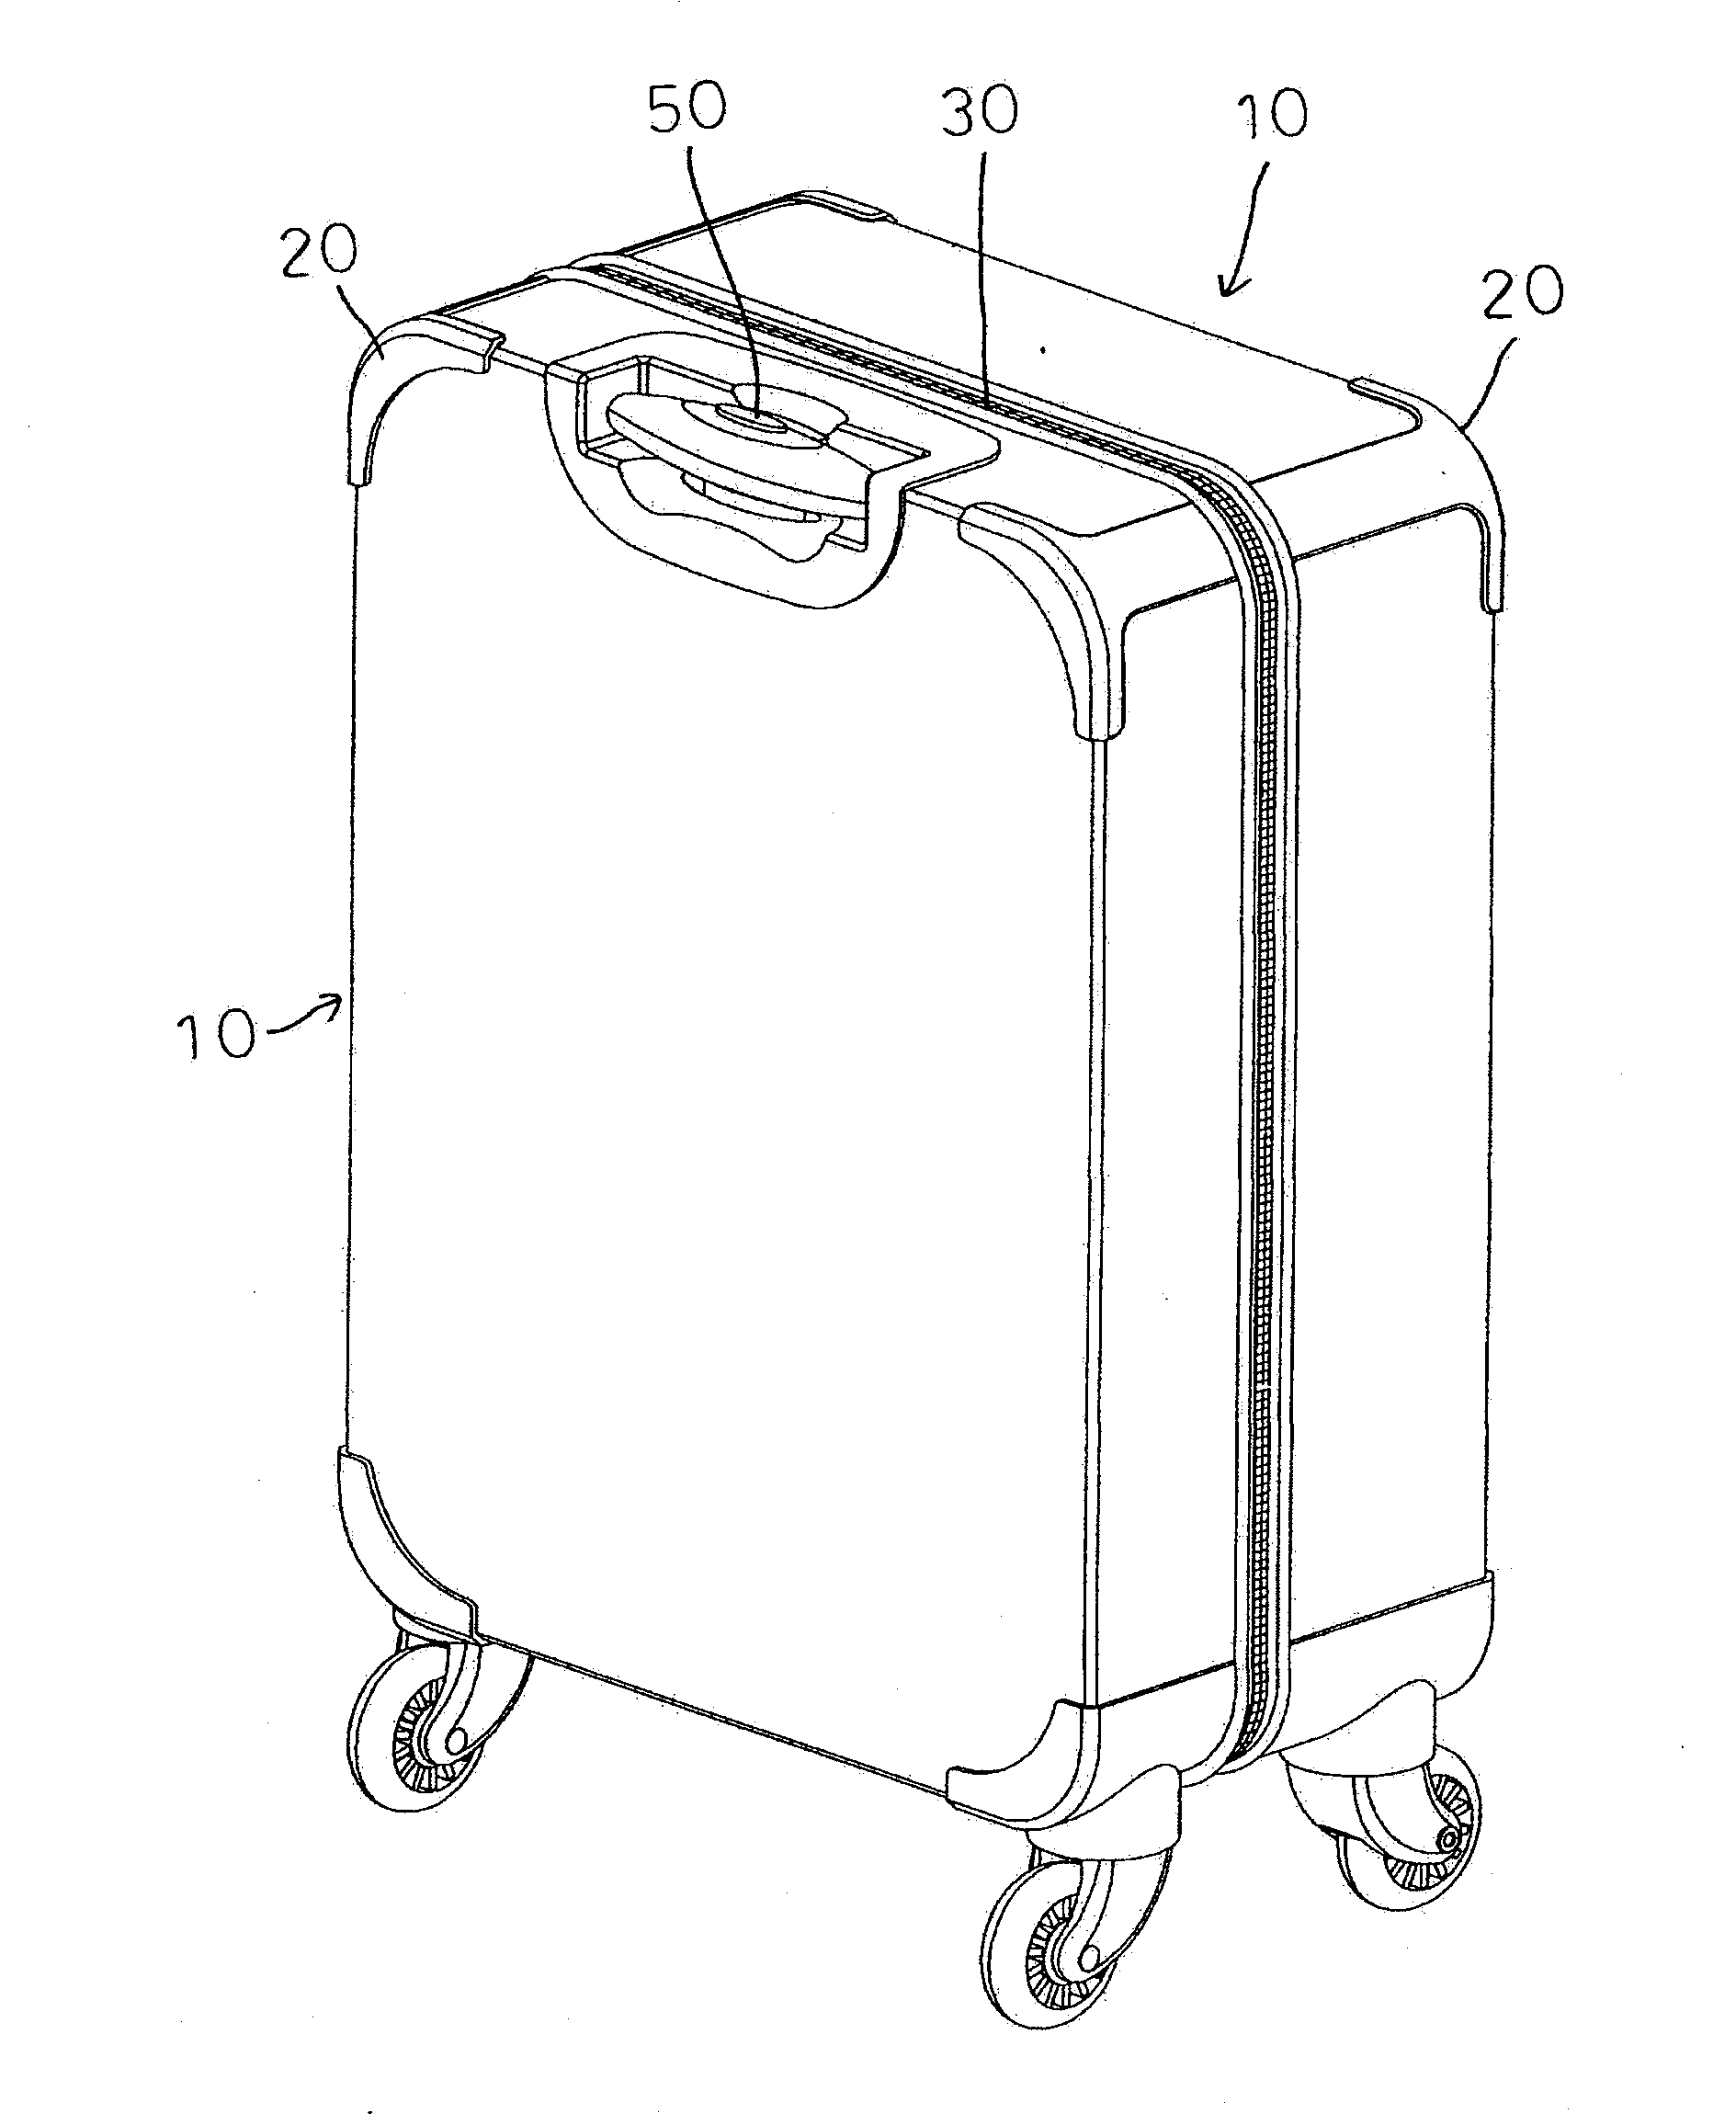 Combination Luggage that is Assembled by User